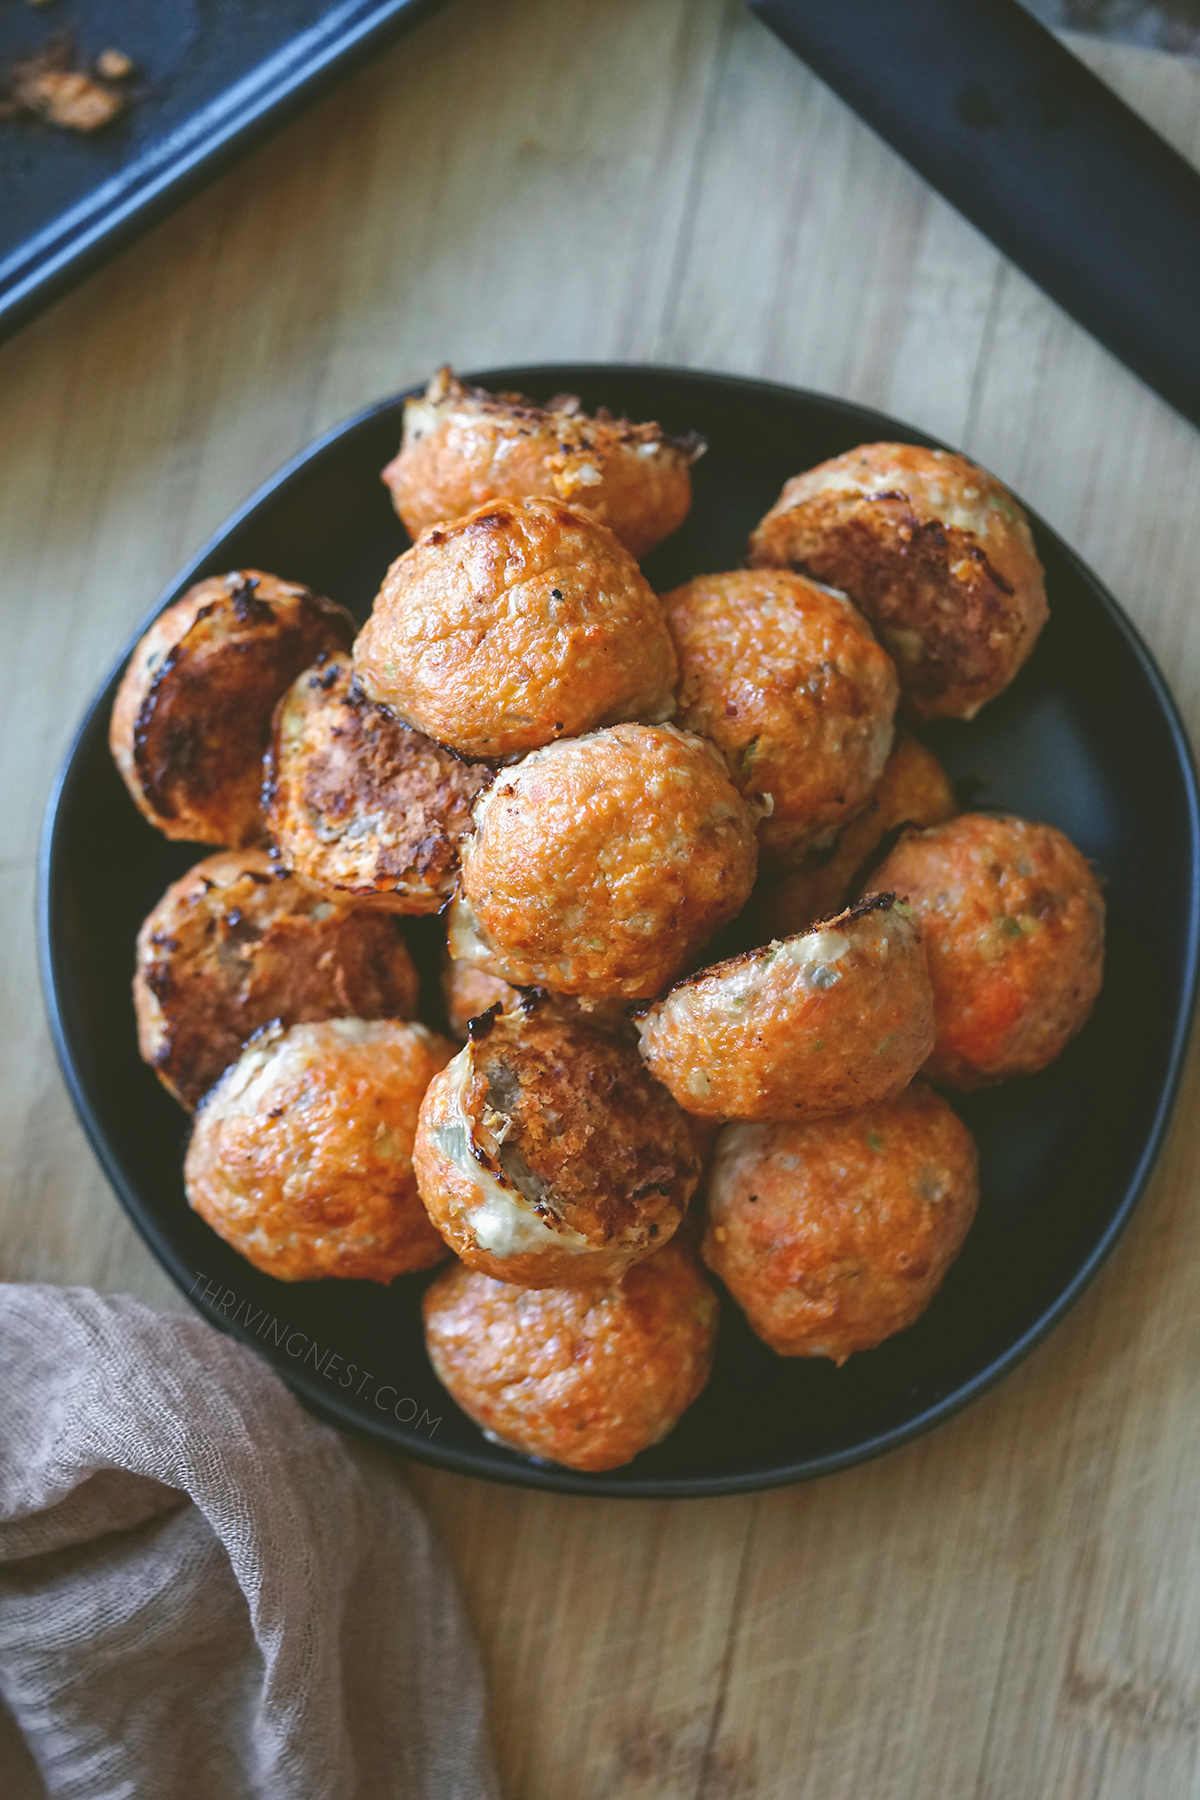 Salmon baby meatballs - perfect as finger food or baby led weaning.